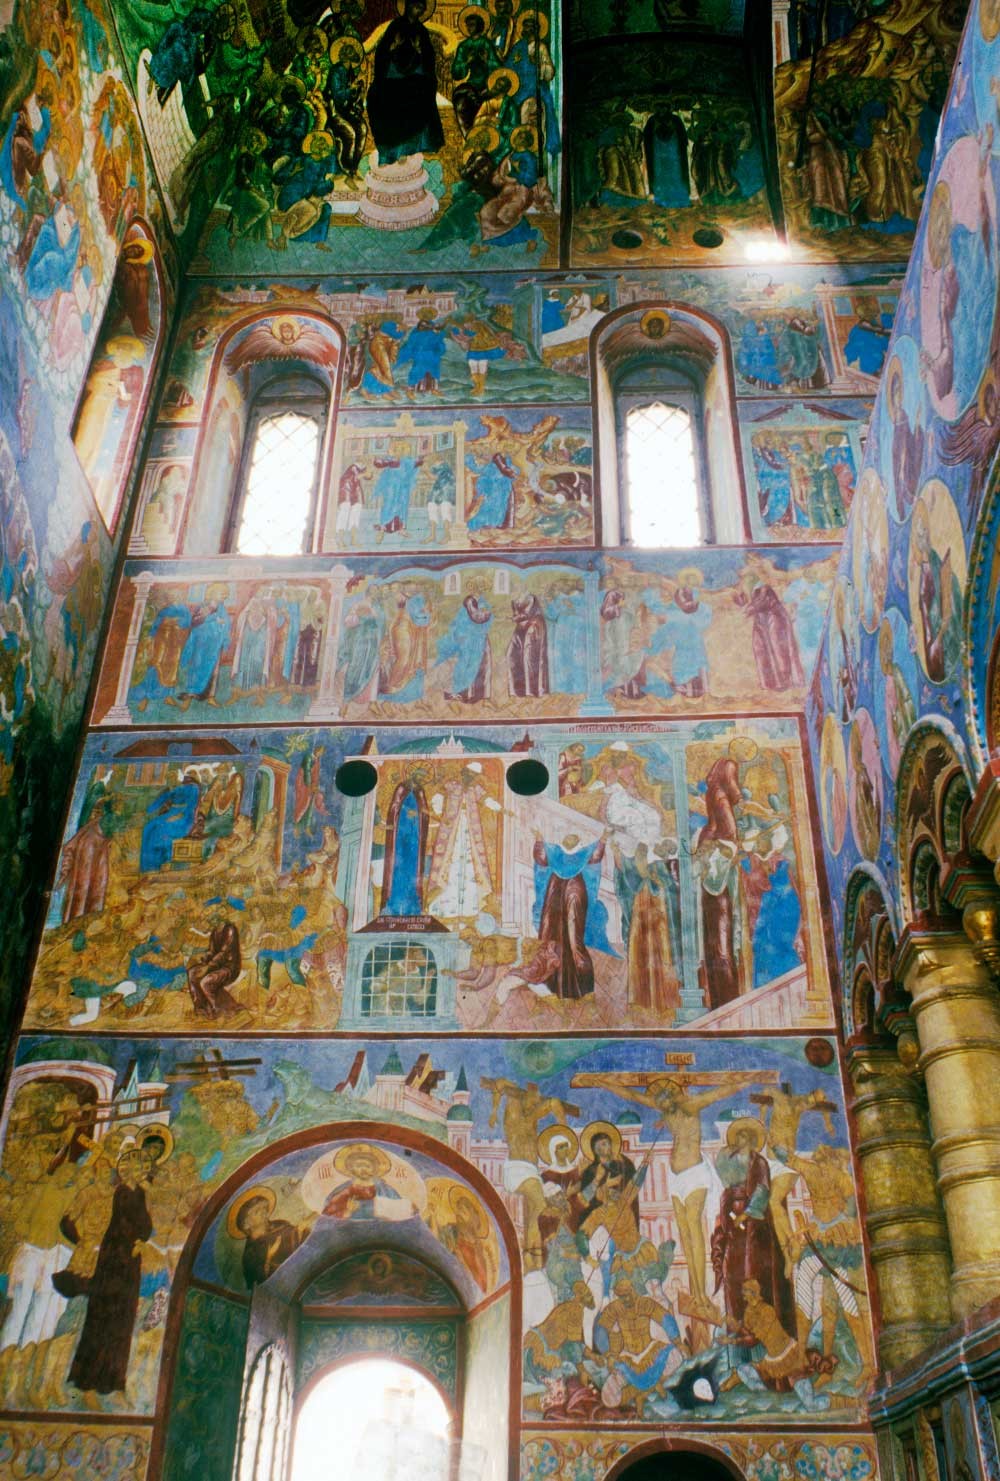 Church of the Savior. North wall frescoes, with lower rows depicting Passion of Christ & Crucifixion. July 29, 1997.